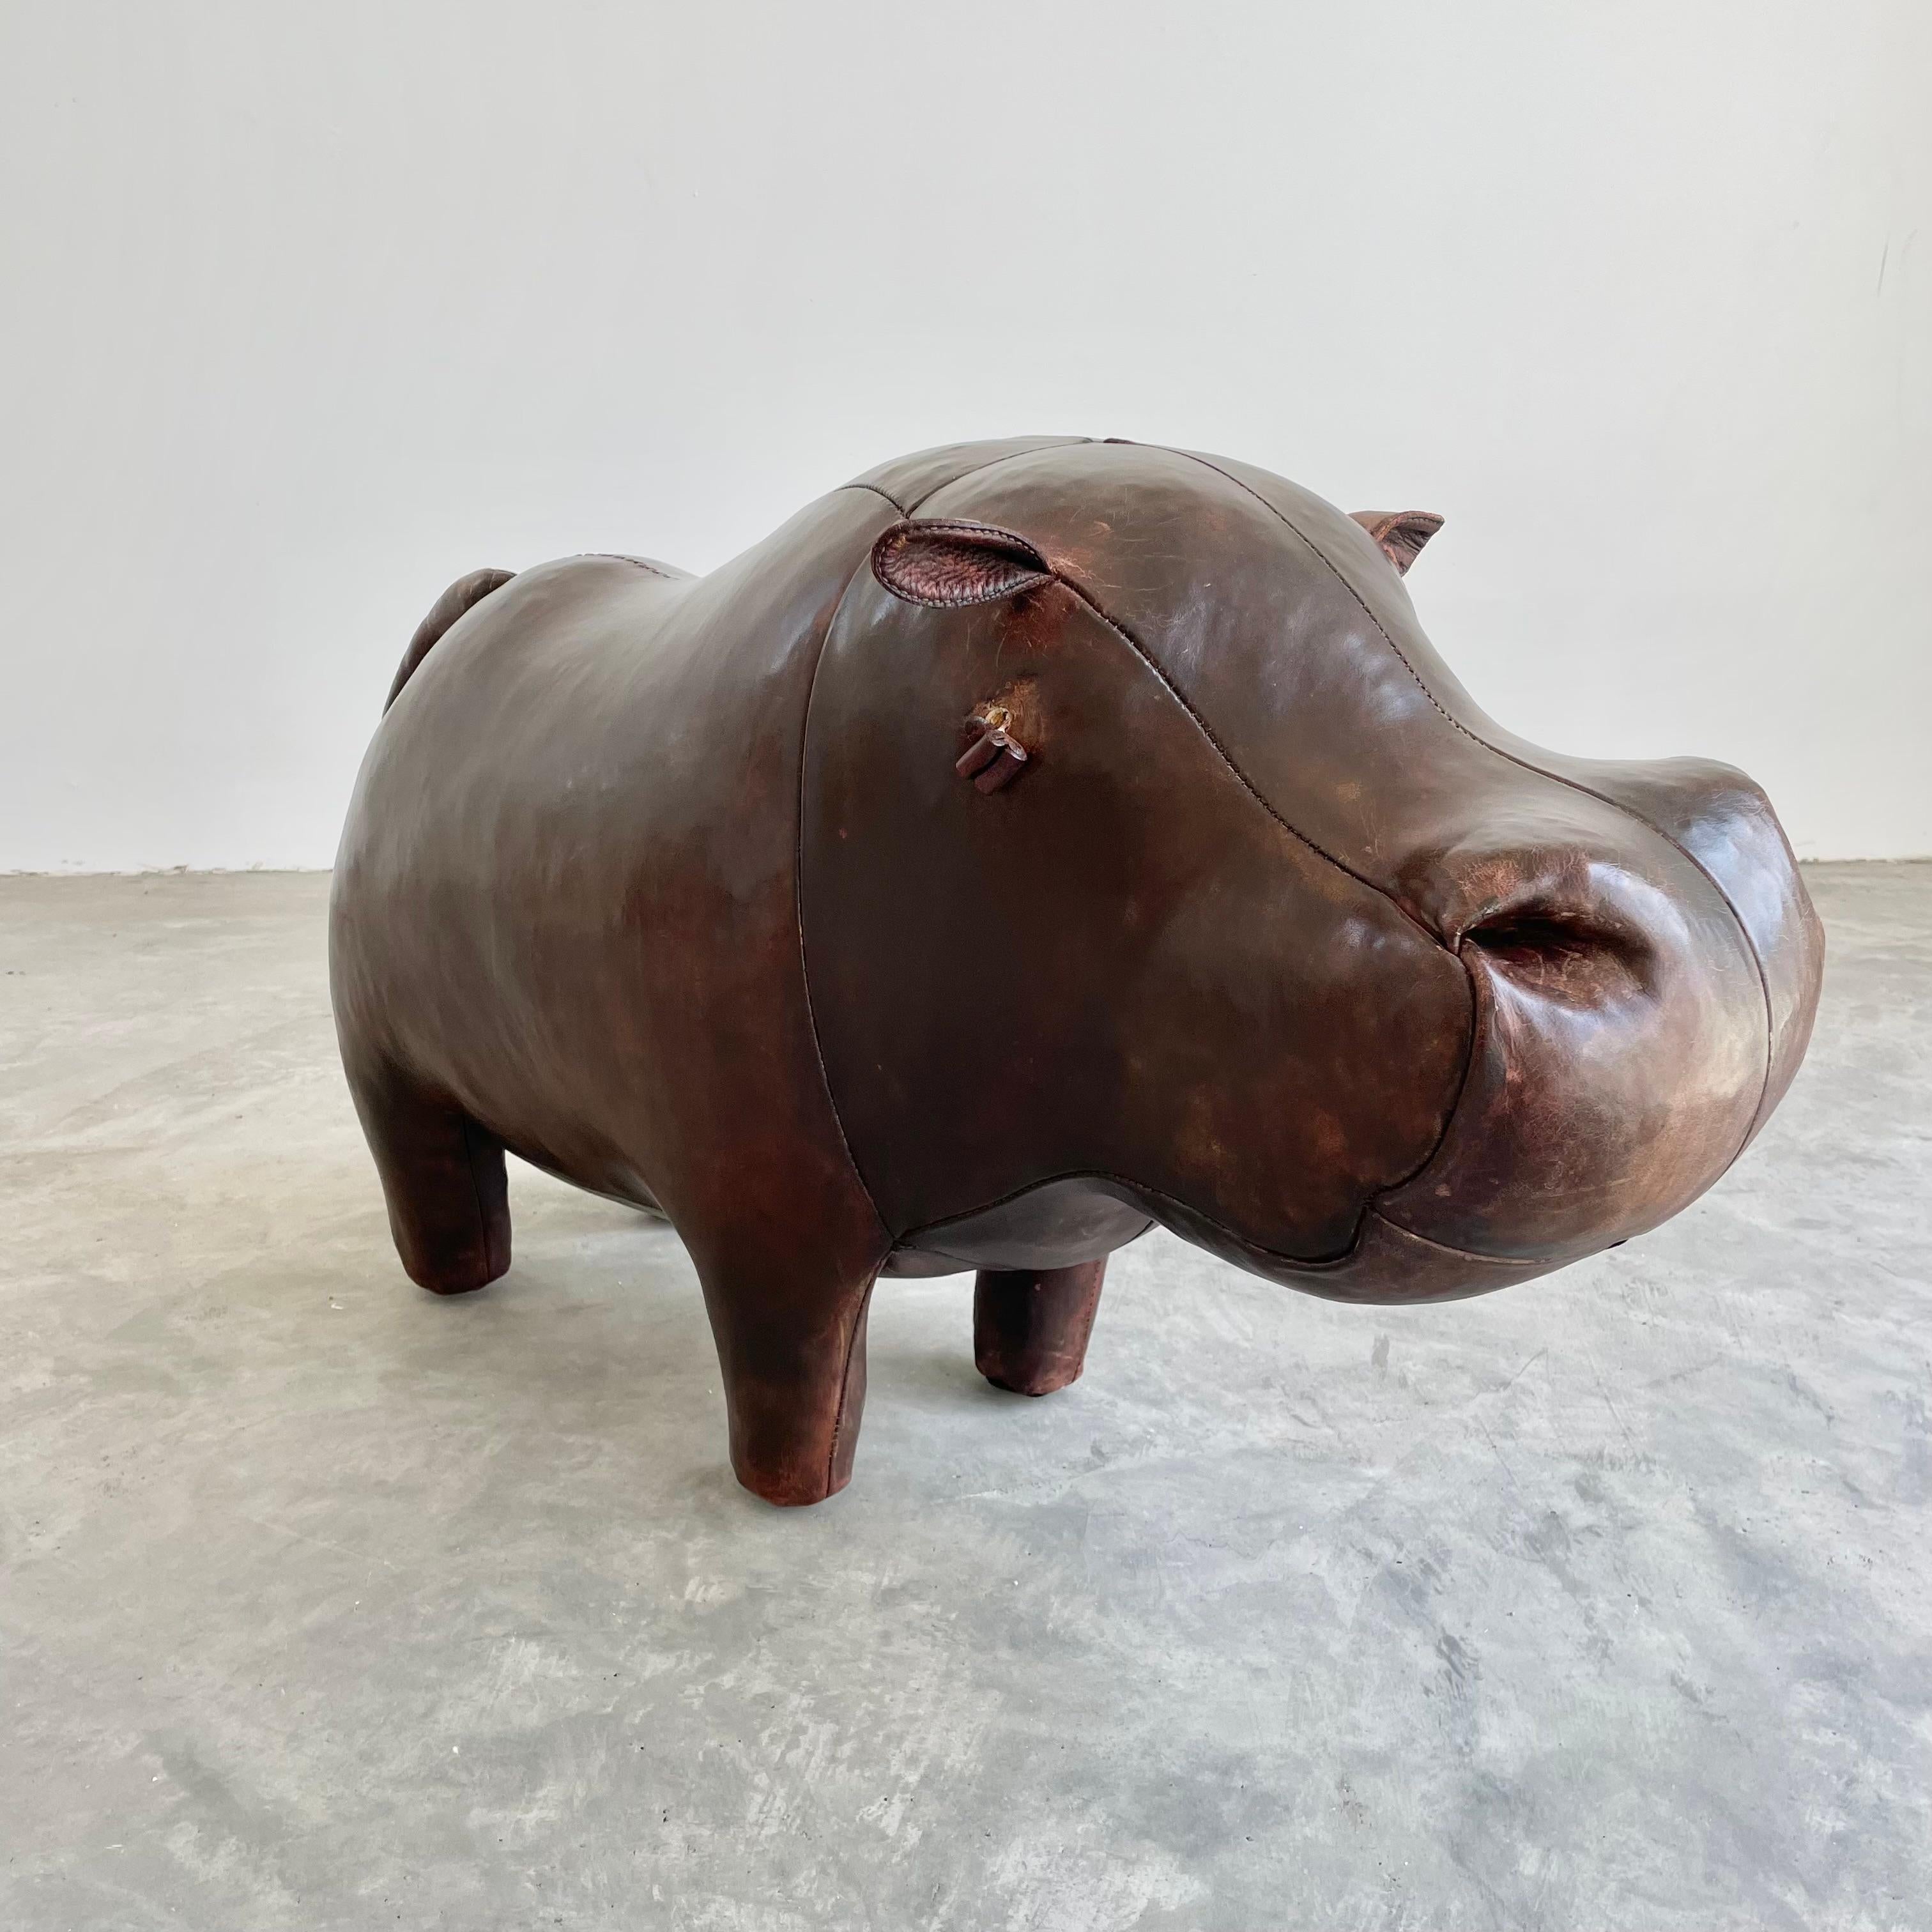 Beautiful large leather hippopotamus by Omersa. Heavy, functional stool, strong enough for an adult. Made in England, Circa 1960s. Beautiful vintage coloring and patina. No tears or rips. Great sculptural seat. Fun piece of usable art for the home.